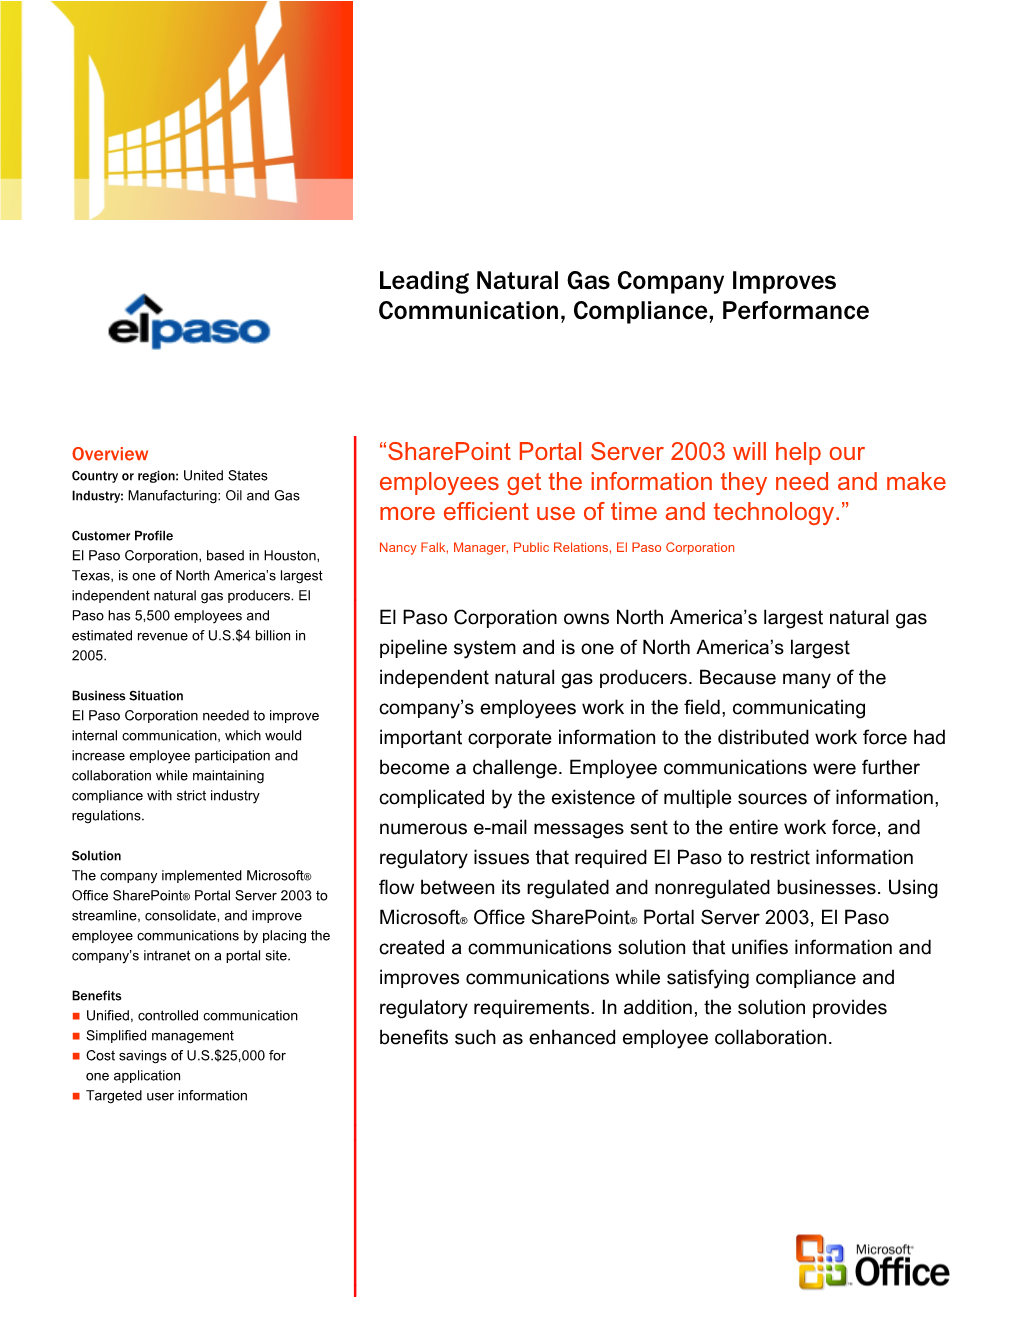 Leading Natural Gas Company Improves Communication, Compliance, Performance